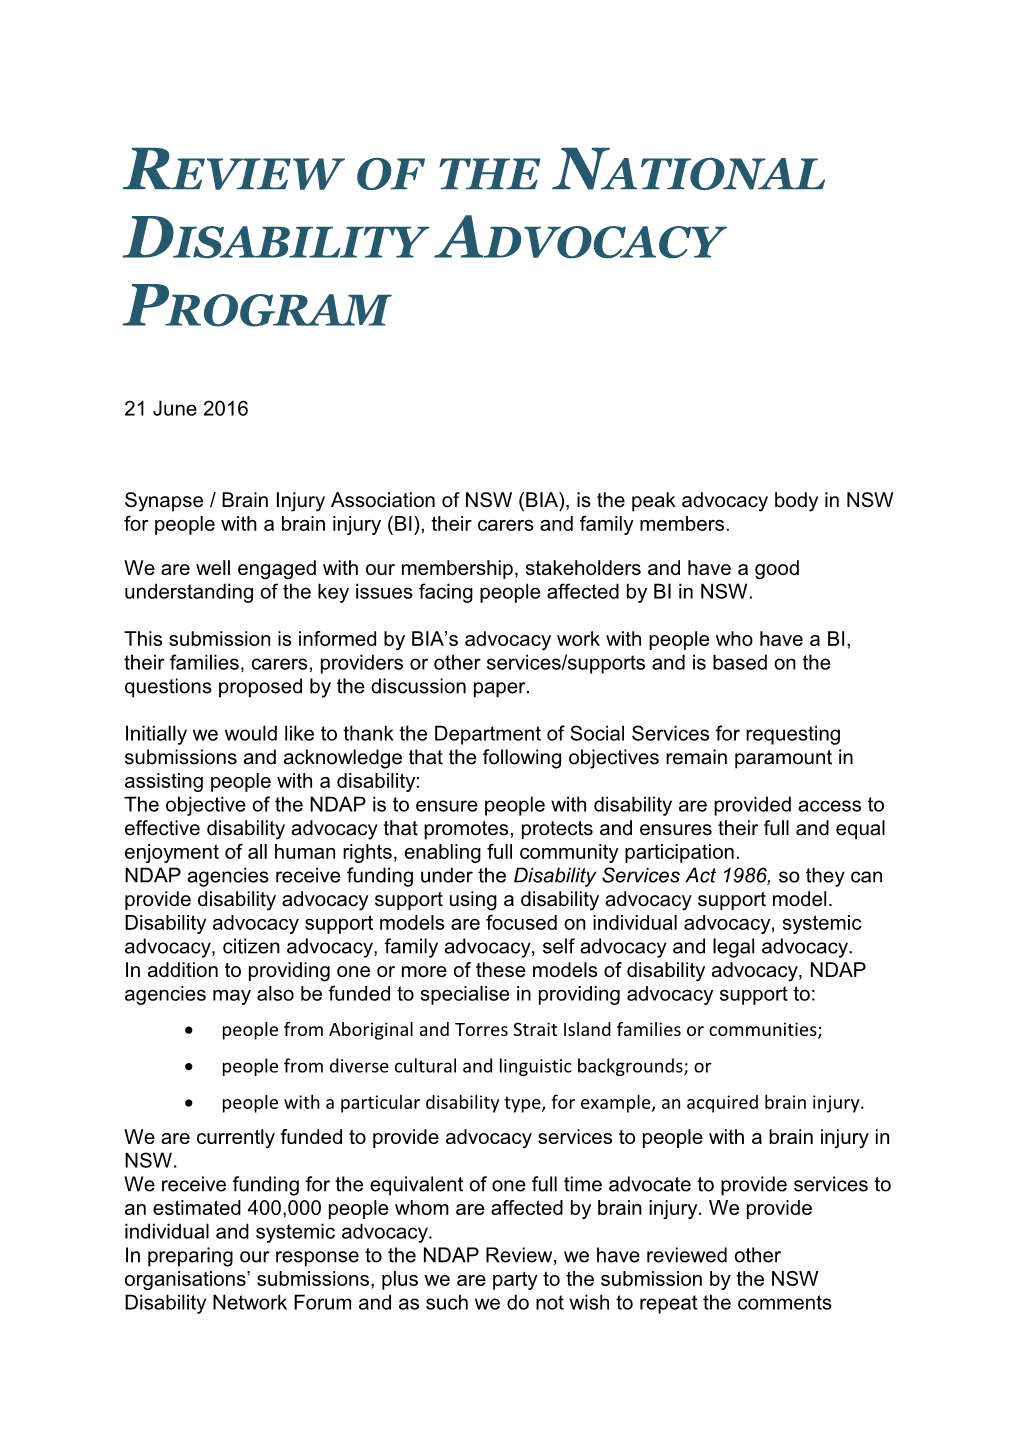 Review of the National Disability Advocacy Program